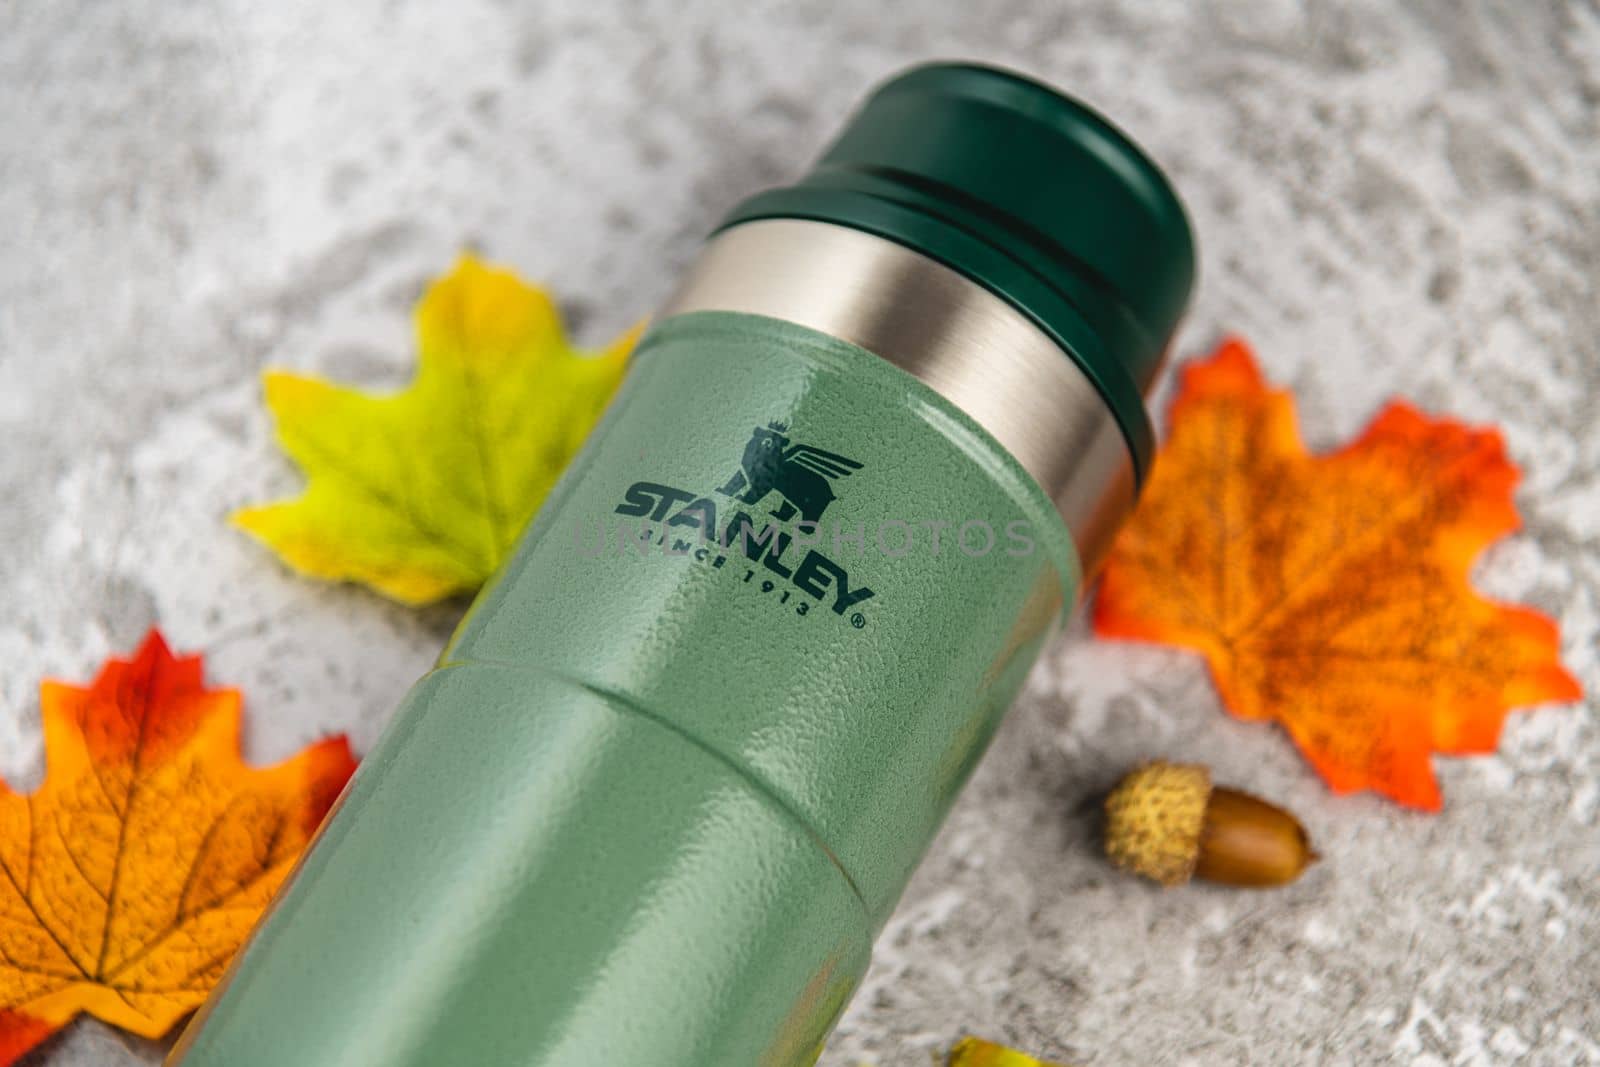 Antalya, Turkey - November 28, 2022: Stanley Action Trigger thermos mug with leaves in autumn colors on stone background